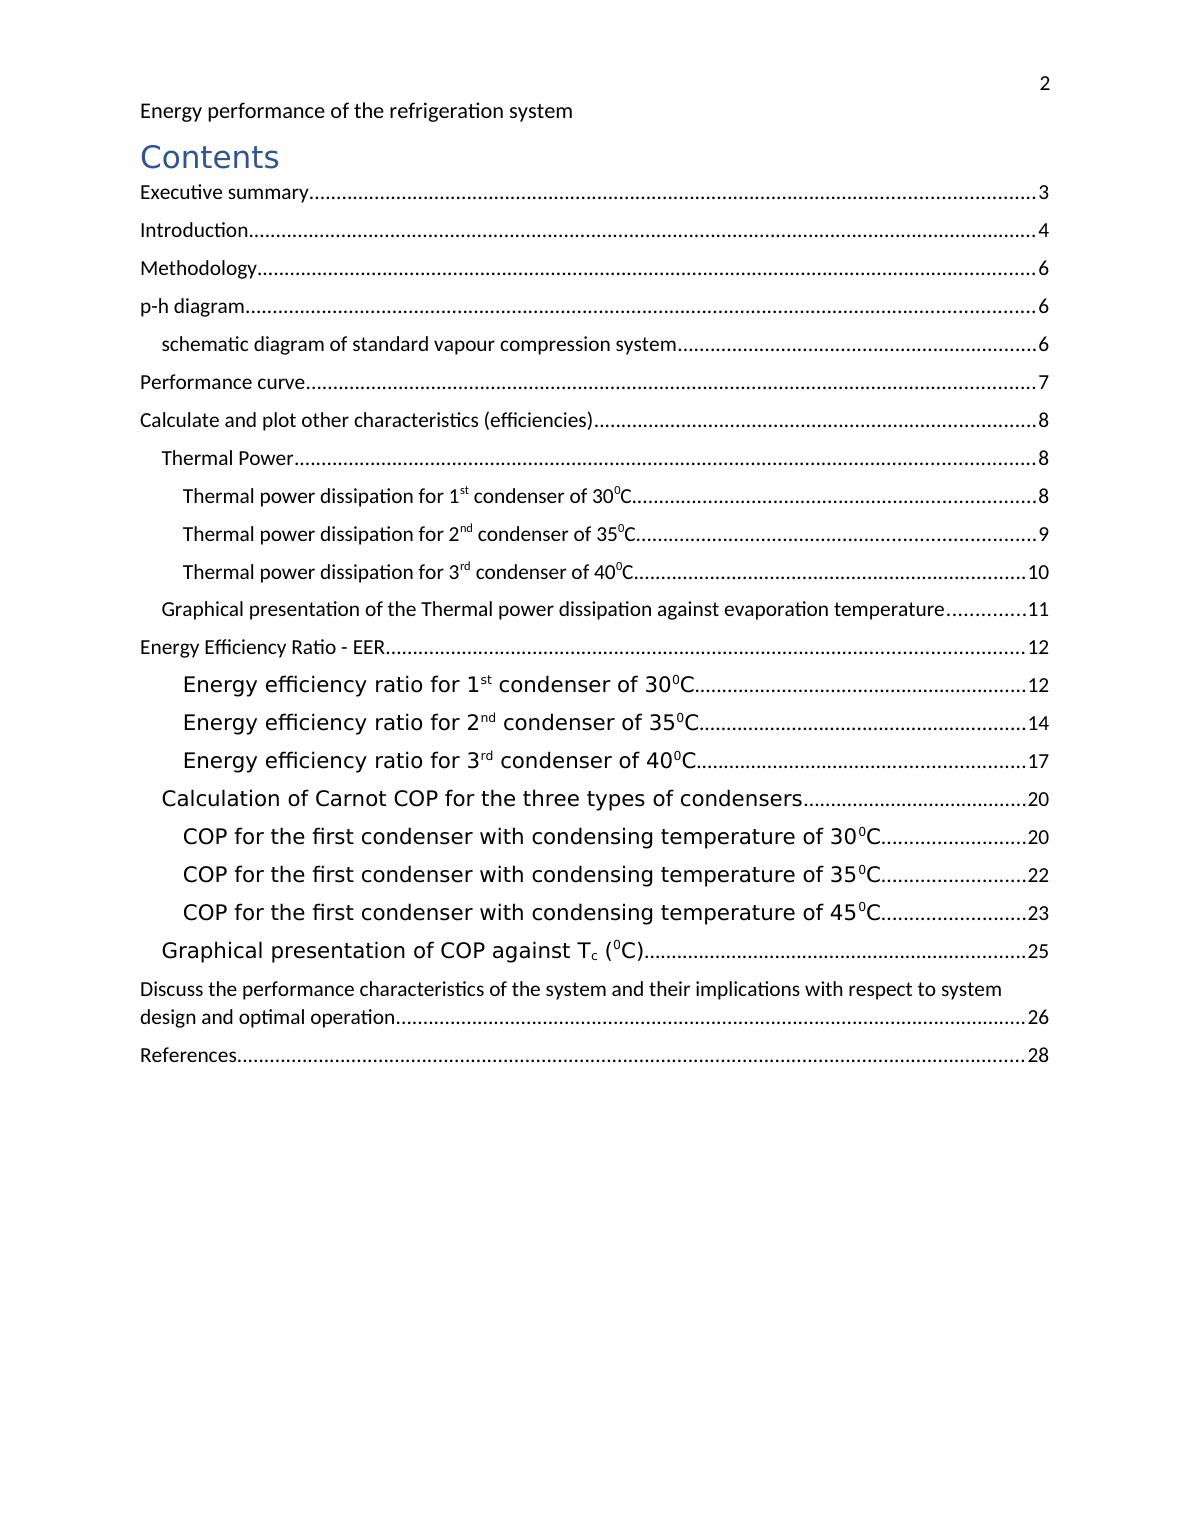 Energy performance of the refrigeration systems_2